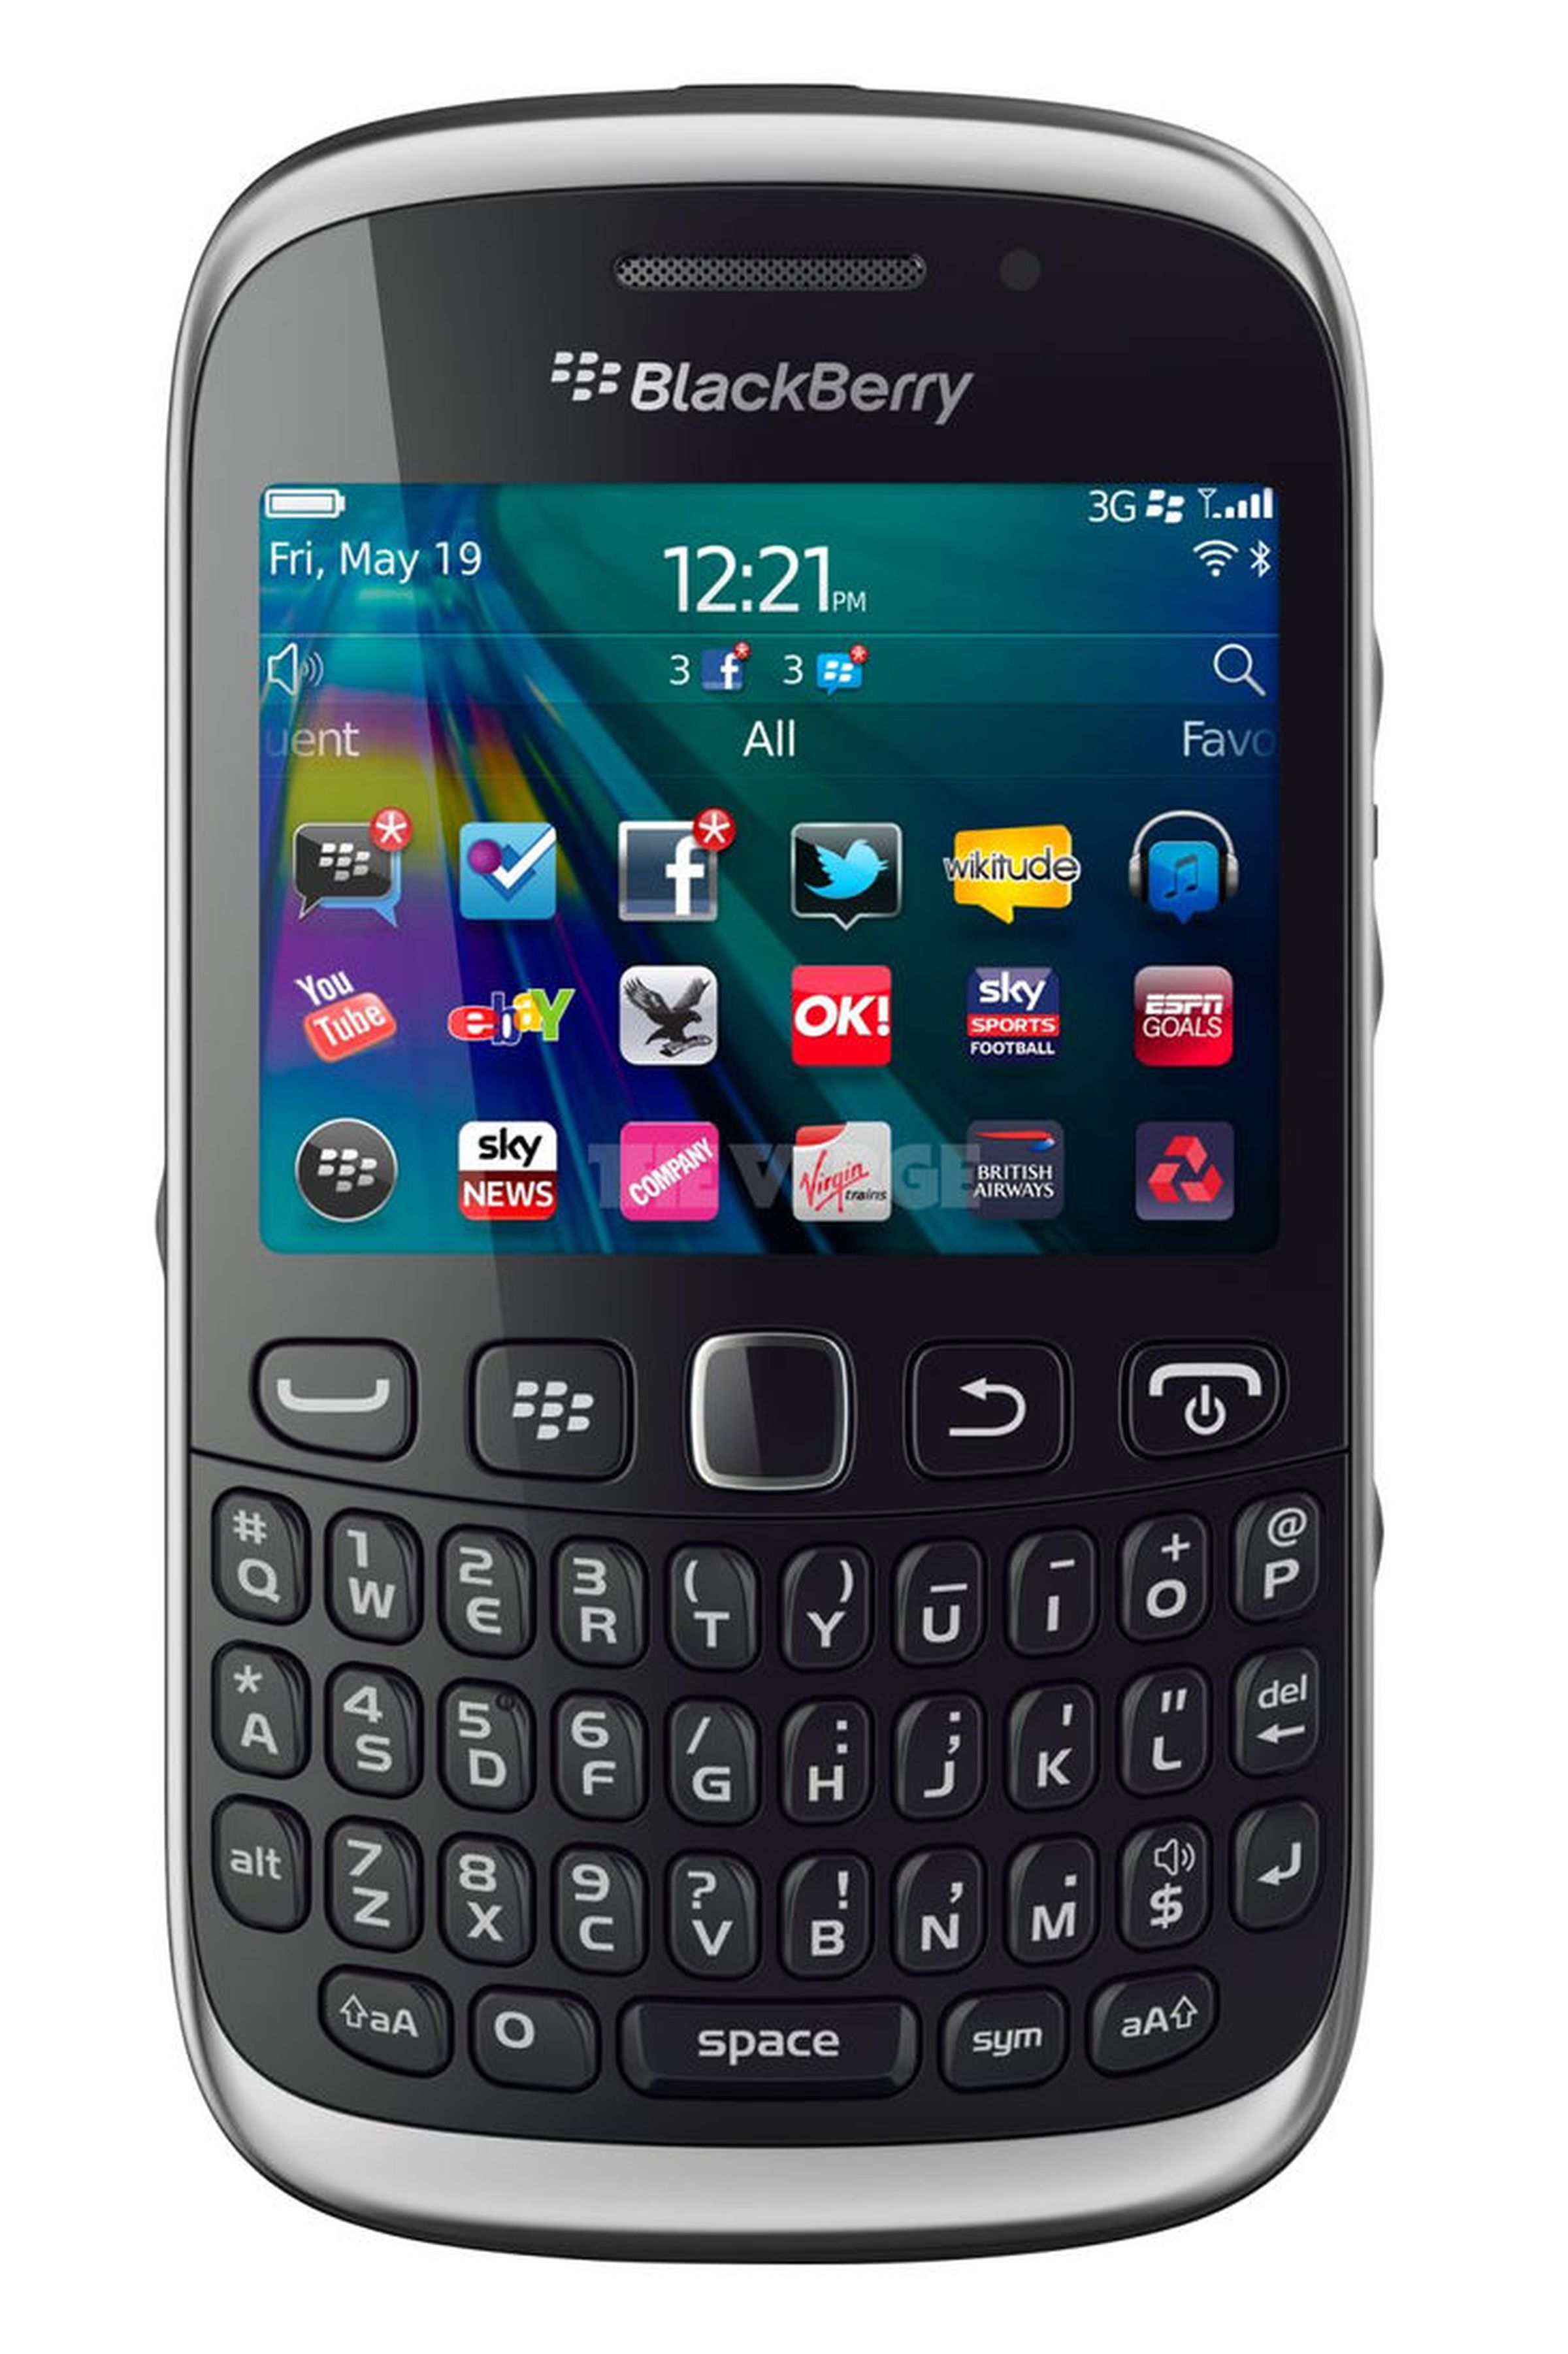 BlackBerry Curve 9320 revealed in press images